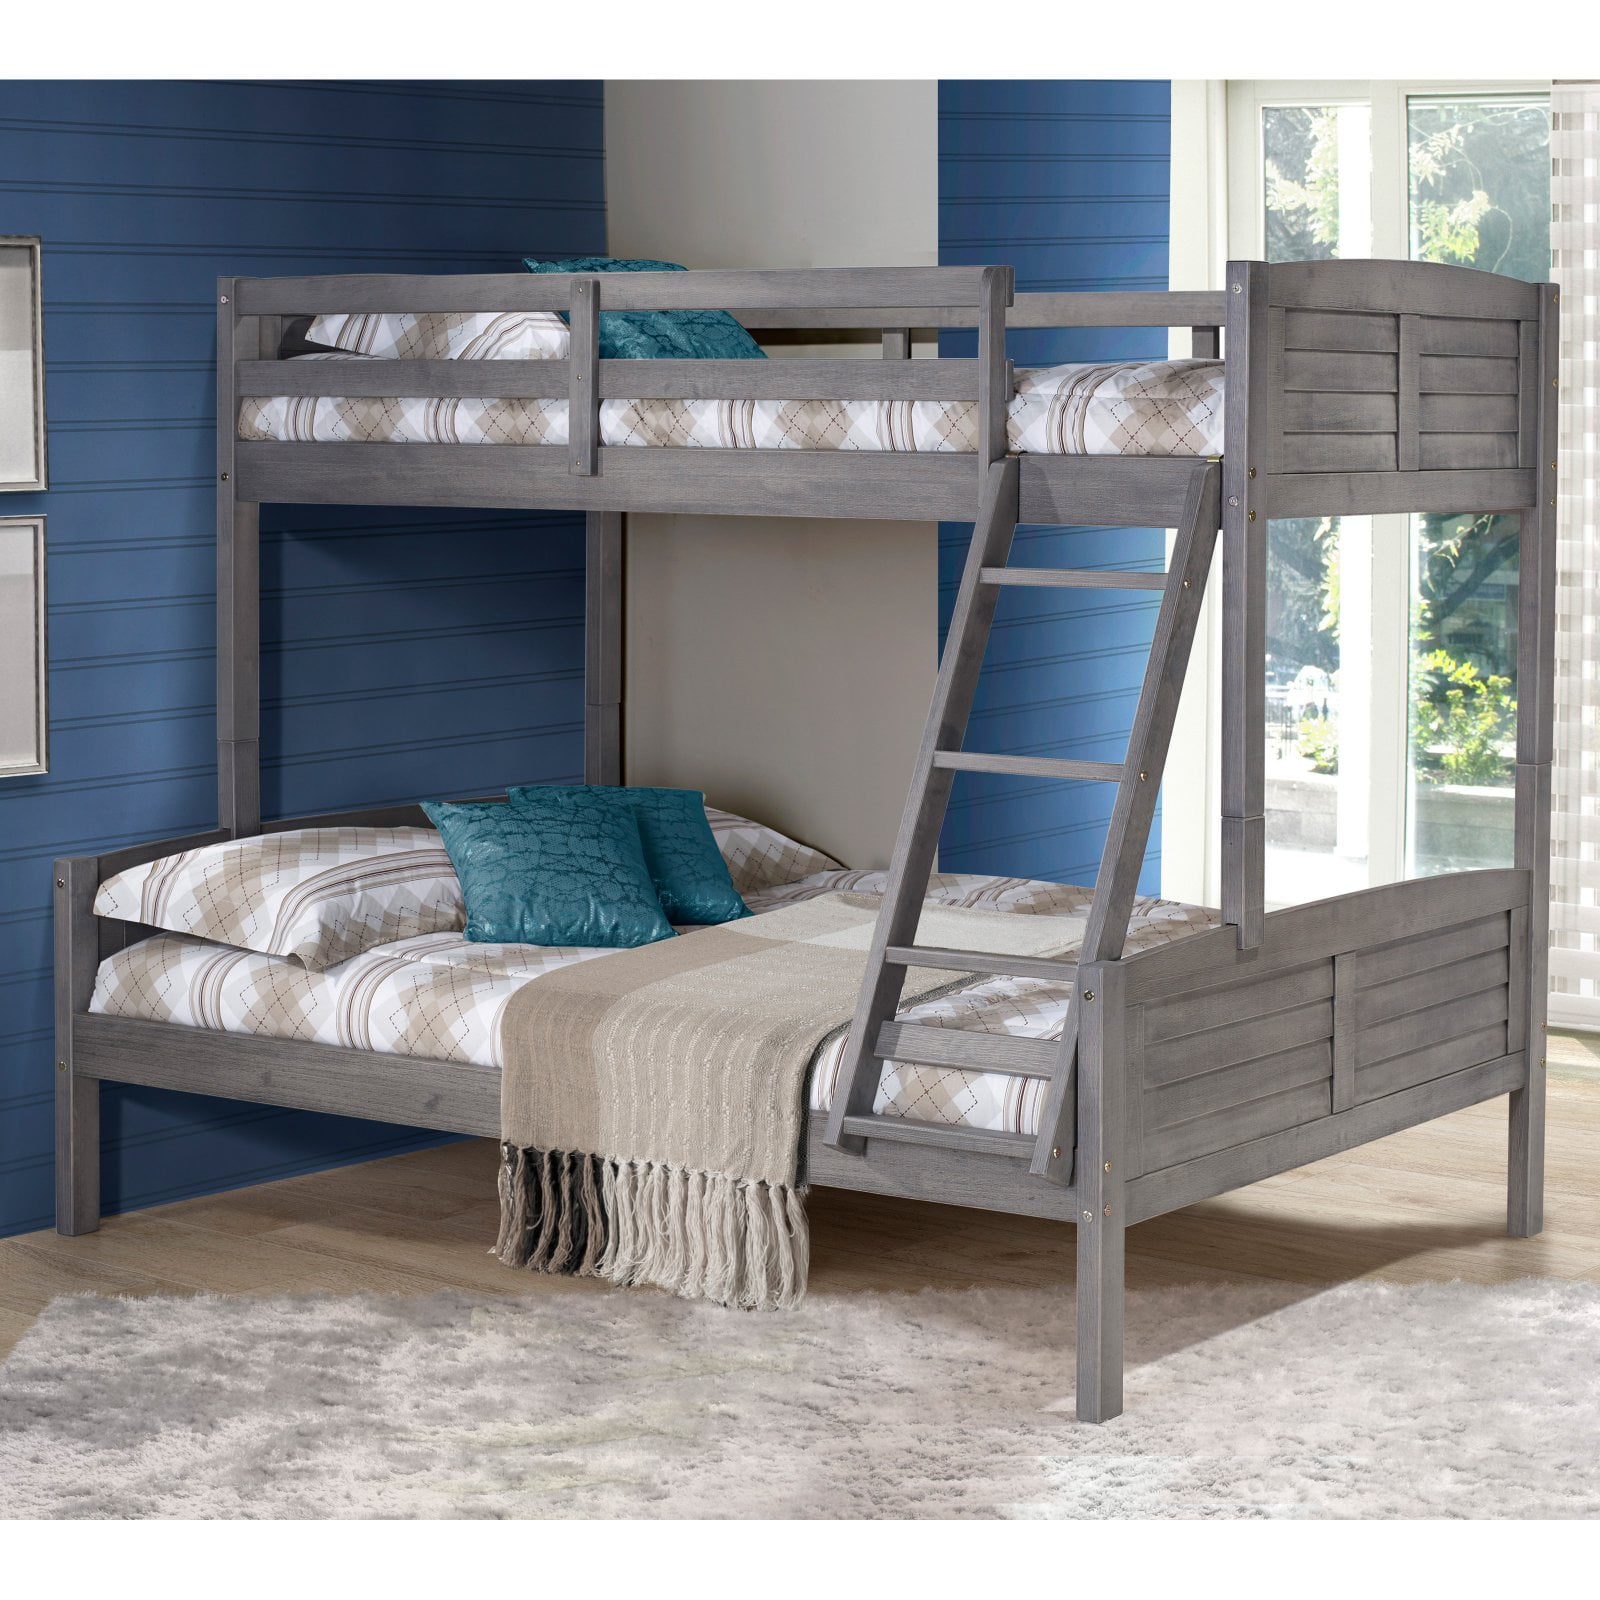 Donco Kids Louver Wood Bunk Bed Twin, Childrens Bunk Beds Twin Over Full